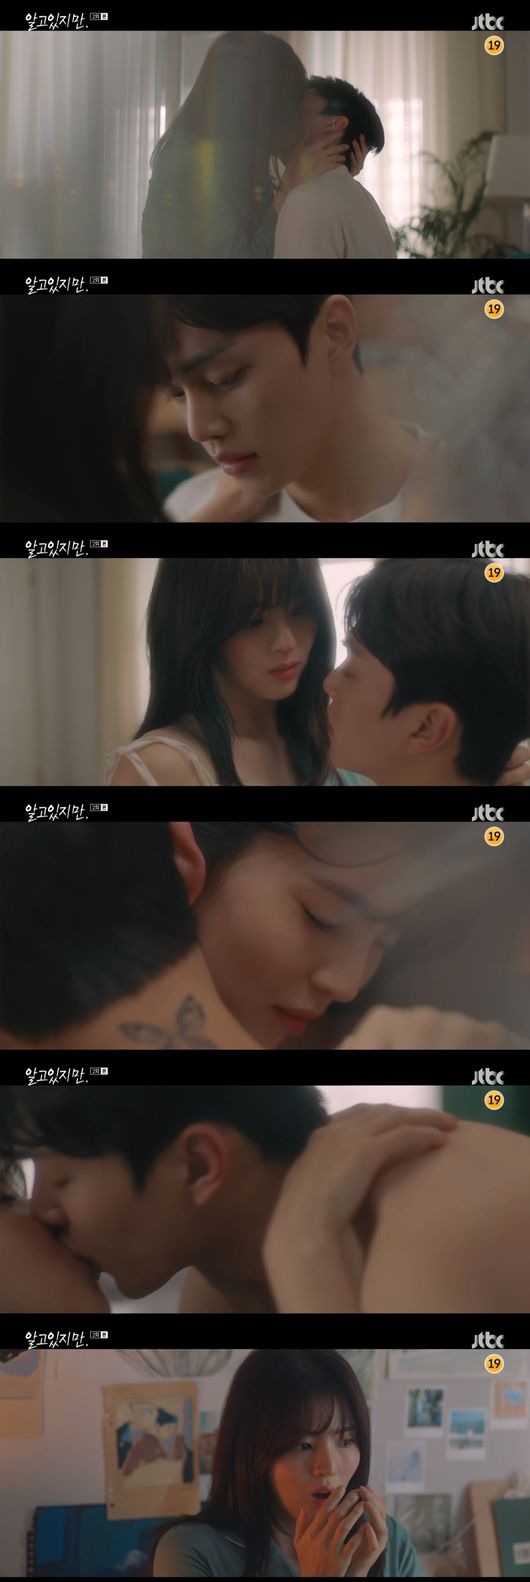 Han So Hee and Song Kang finally kissed.On JTBCs I Know You, which aired on the 26th, Yunabi wiped and kissed the lips of Park Jae-eon, who kissed another woman.On this day, Yunabi tried to show a cool appearance by deciding to hit the iron wall to Park Jae-eun.However, Park Jae-hyuns SMS and sweet words showed his mind gradually, and even Yunabi had a wild dream of sleeping with Park Jae-hyun and was late for the presentation The Lesson.In the afternoon, Yunabi, who participated in The Lesson, met Park Jae-eon, who sat next to Yunabi and listened to The Lesson, and Yunabi was suffering from menstrual pain.Yunabi asked Ohlightna for a sanitary pad, but she could not confirm the SMS.Yunabi told Park Jae-un during the break of The Lesson, You should go out quickly because the children are out. Park Jae-hyun said, You sometimes suddenly draw me.Yunabi showed a concern for Park Jae-eon.Yunabi began her presentation at The Lesson, but she was troubled by her sudden visit to her period, and eventually Yunabi came out with her bag behind her.At that time, Park Jae-eon followed Yunabi and Park Jae-eon tied his outer clothes to Yunabi. Yunabi thought upsetly, saying, I want to cry and why do I want to cry?Yunabi asked, Are you going to tell the children? Park Jae-hyun asked, Are you going to tell the children when you see the men suddenly tenting in The Lesson?Yunabi said he would not say, Is that the same as that? The two have a secret to know each other again.Youre a thumb tanya, said Yunabi, who watched Yunabi and Park Jae-un SMS. Its not a thumb, but its not a push to push a good girl to me.Things you felt special might not be a big deal for him. Park is kind. There is no exception for anyone.Dont tell me later why you didnt stop me, he said.On the other hand, Yunabi took a kiss with Park Jae-eun as a penalty for turning soju bottle at a scorn meeting, but chose a soju shot instead of kissing.Yunabi was embarrassed to see Park Jae-hyun kissing another woman on the way home from the sneer and children.Park Jae-eon found a hidden Yunabi and approached. Park Jae-eon said, I just played. I was a little sorry I did not get caught. Then Park Jae-eon said, Did not you feel sorry?I wanted to do it with you, he said, approaching Yunabi.Yunabi pushed Park Jae-hyun out and then wiped off Park Jae-hyuns lips with other womans lipstick and kissed him first.Eventually the two kissed hotly and Yunabi thought alone: Thats how Hell Gate opened up.